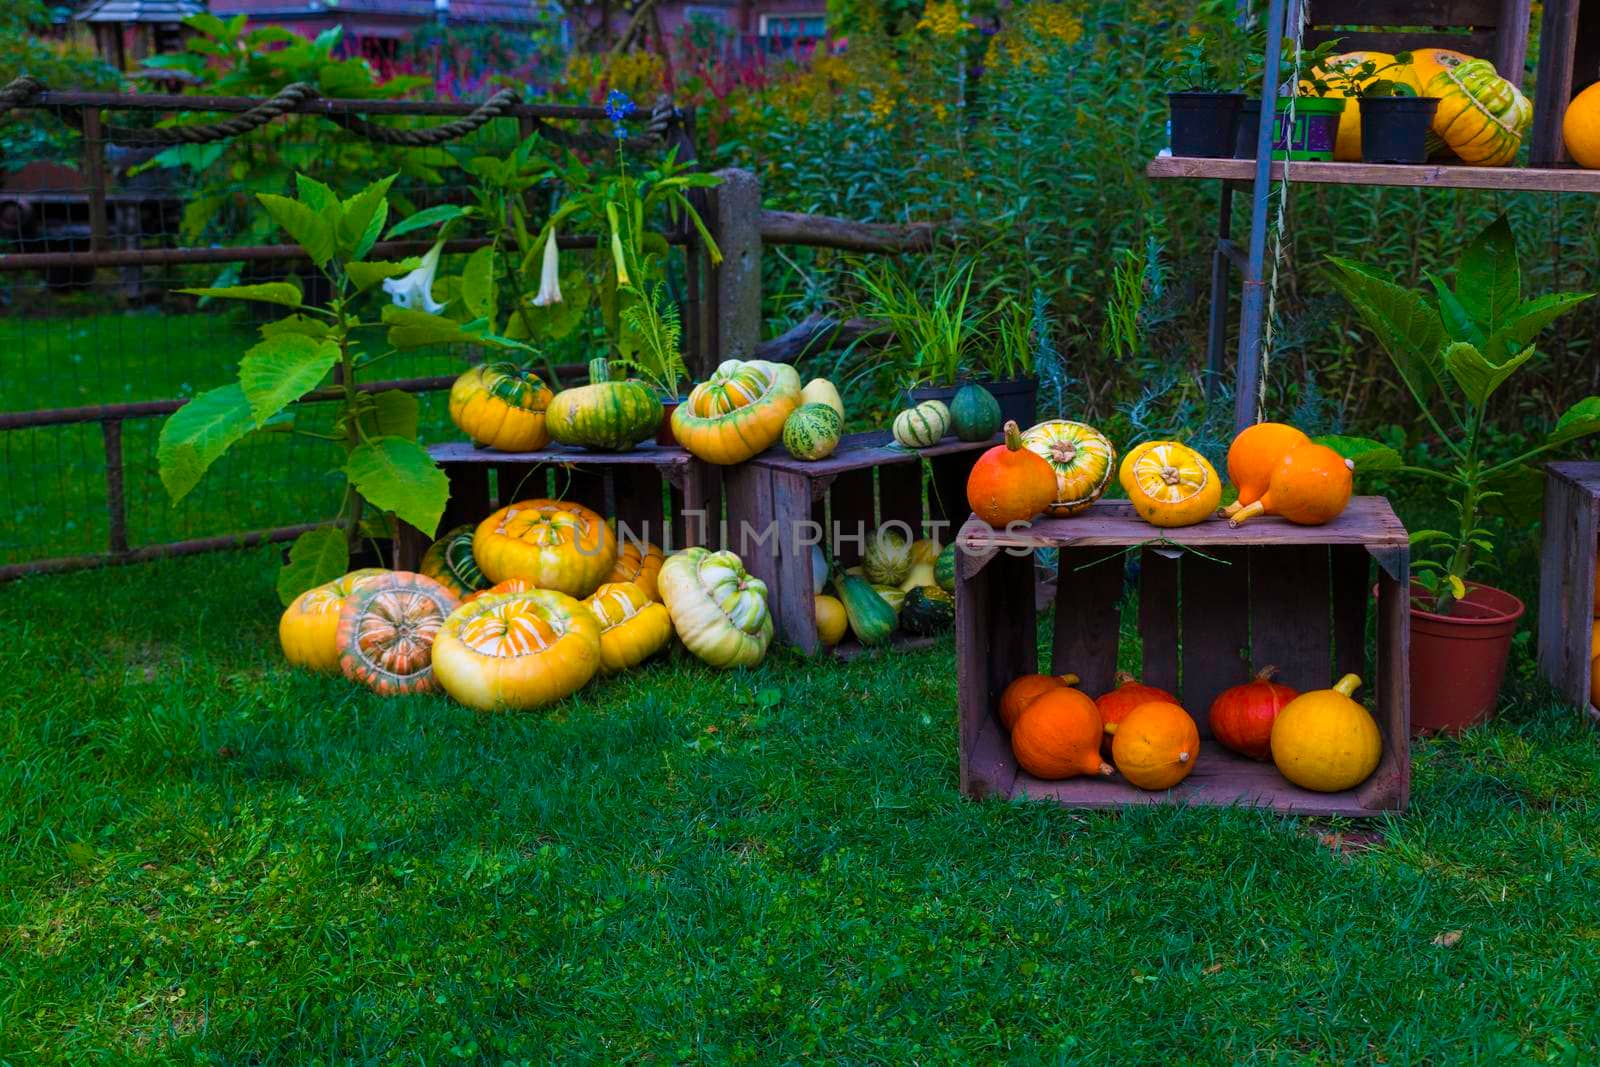 groupo of pumpkins as decoration in a garden in and on a wooden vegetable box on a field of green grass